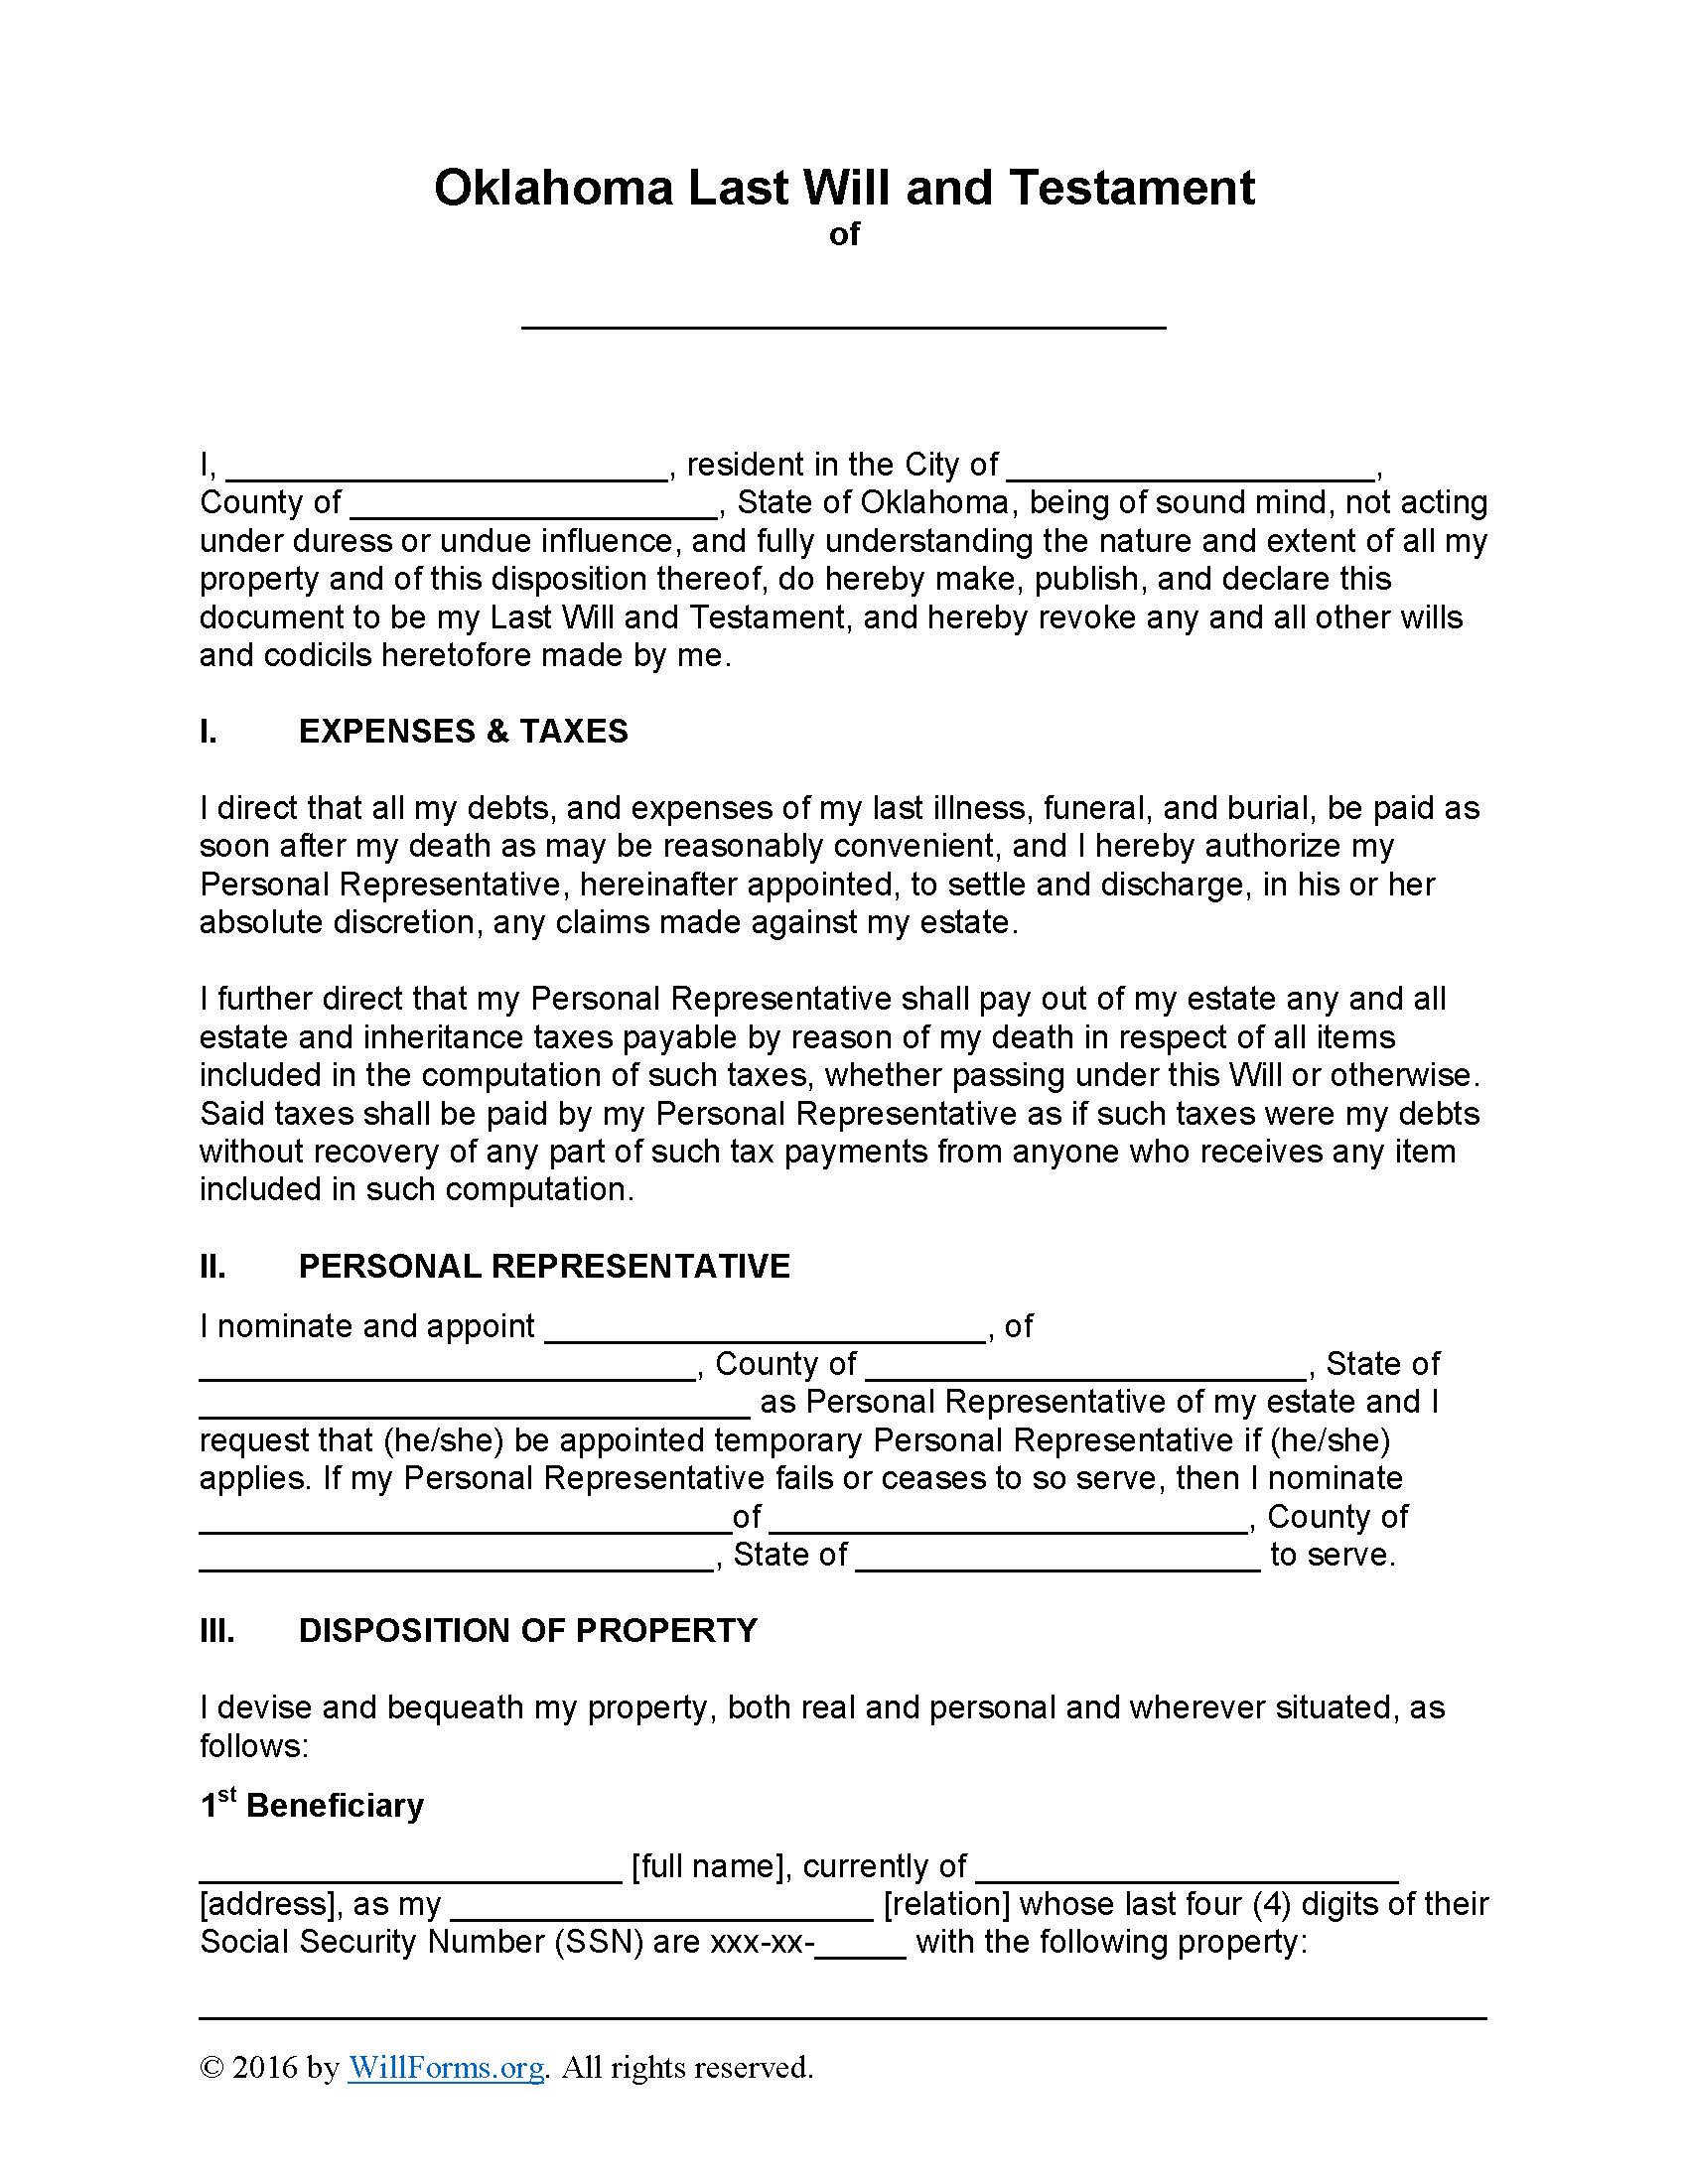 Oklahoma Last Will and Testament Form